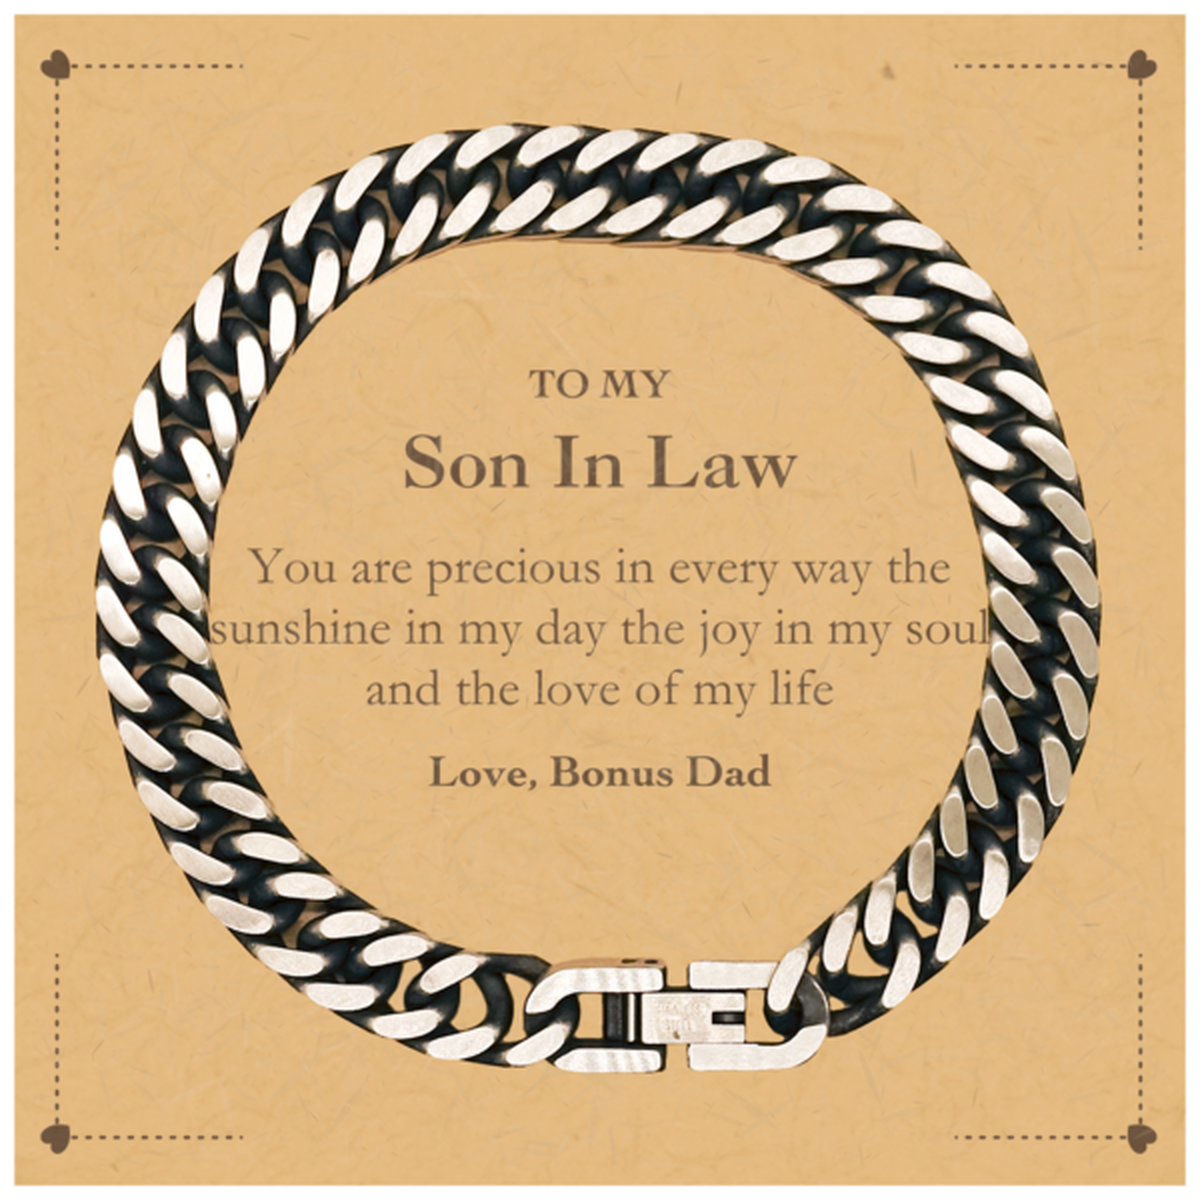 Graduation Gifts for Son In Law Cuban Link Chain Bracelet Present from Bonus Dad, Christmas Son In Law Birthday Gifts Son In Law You are precious in every way the sunshine in my day. Love, Bonus Dad